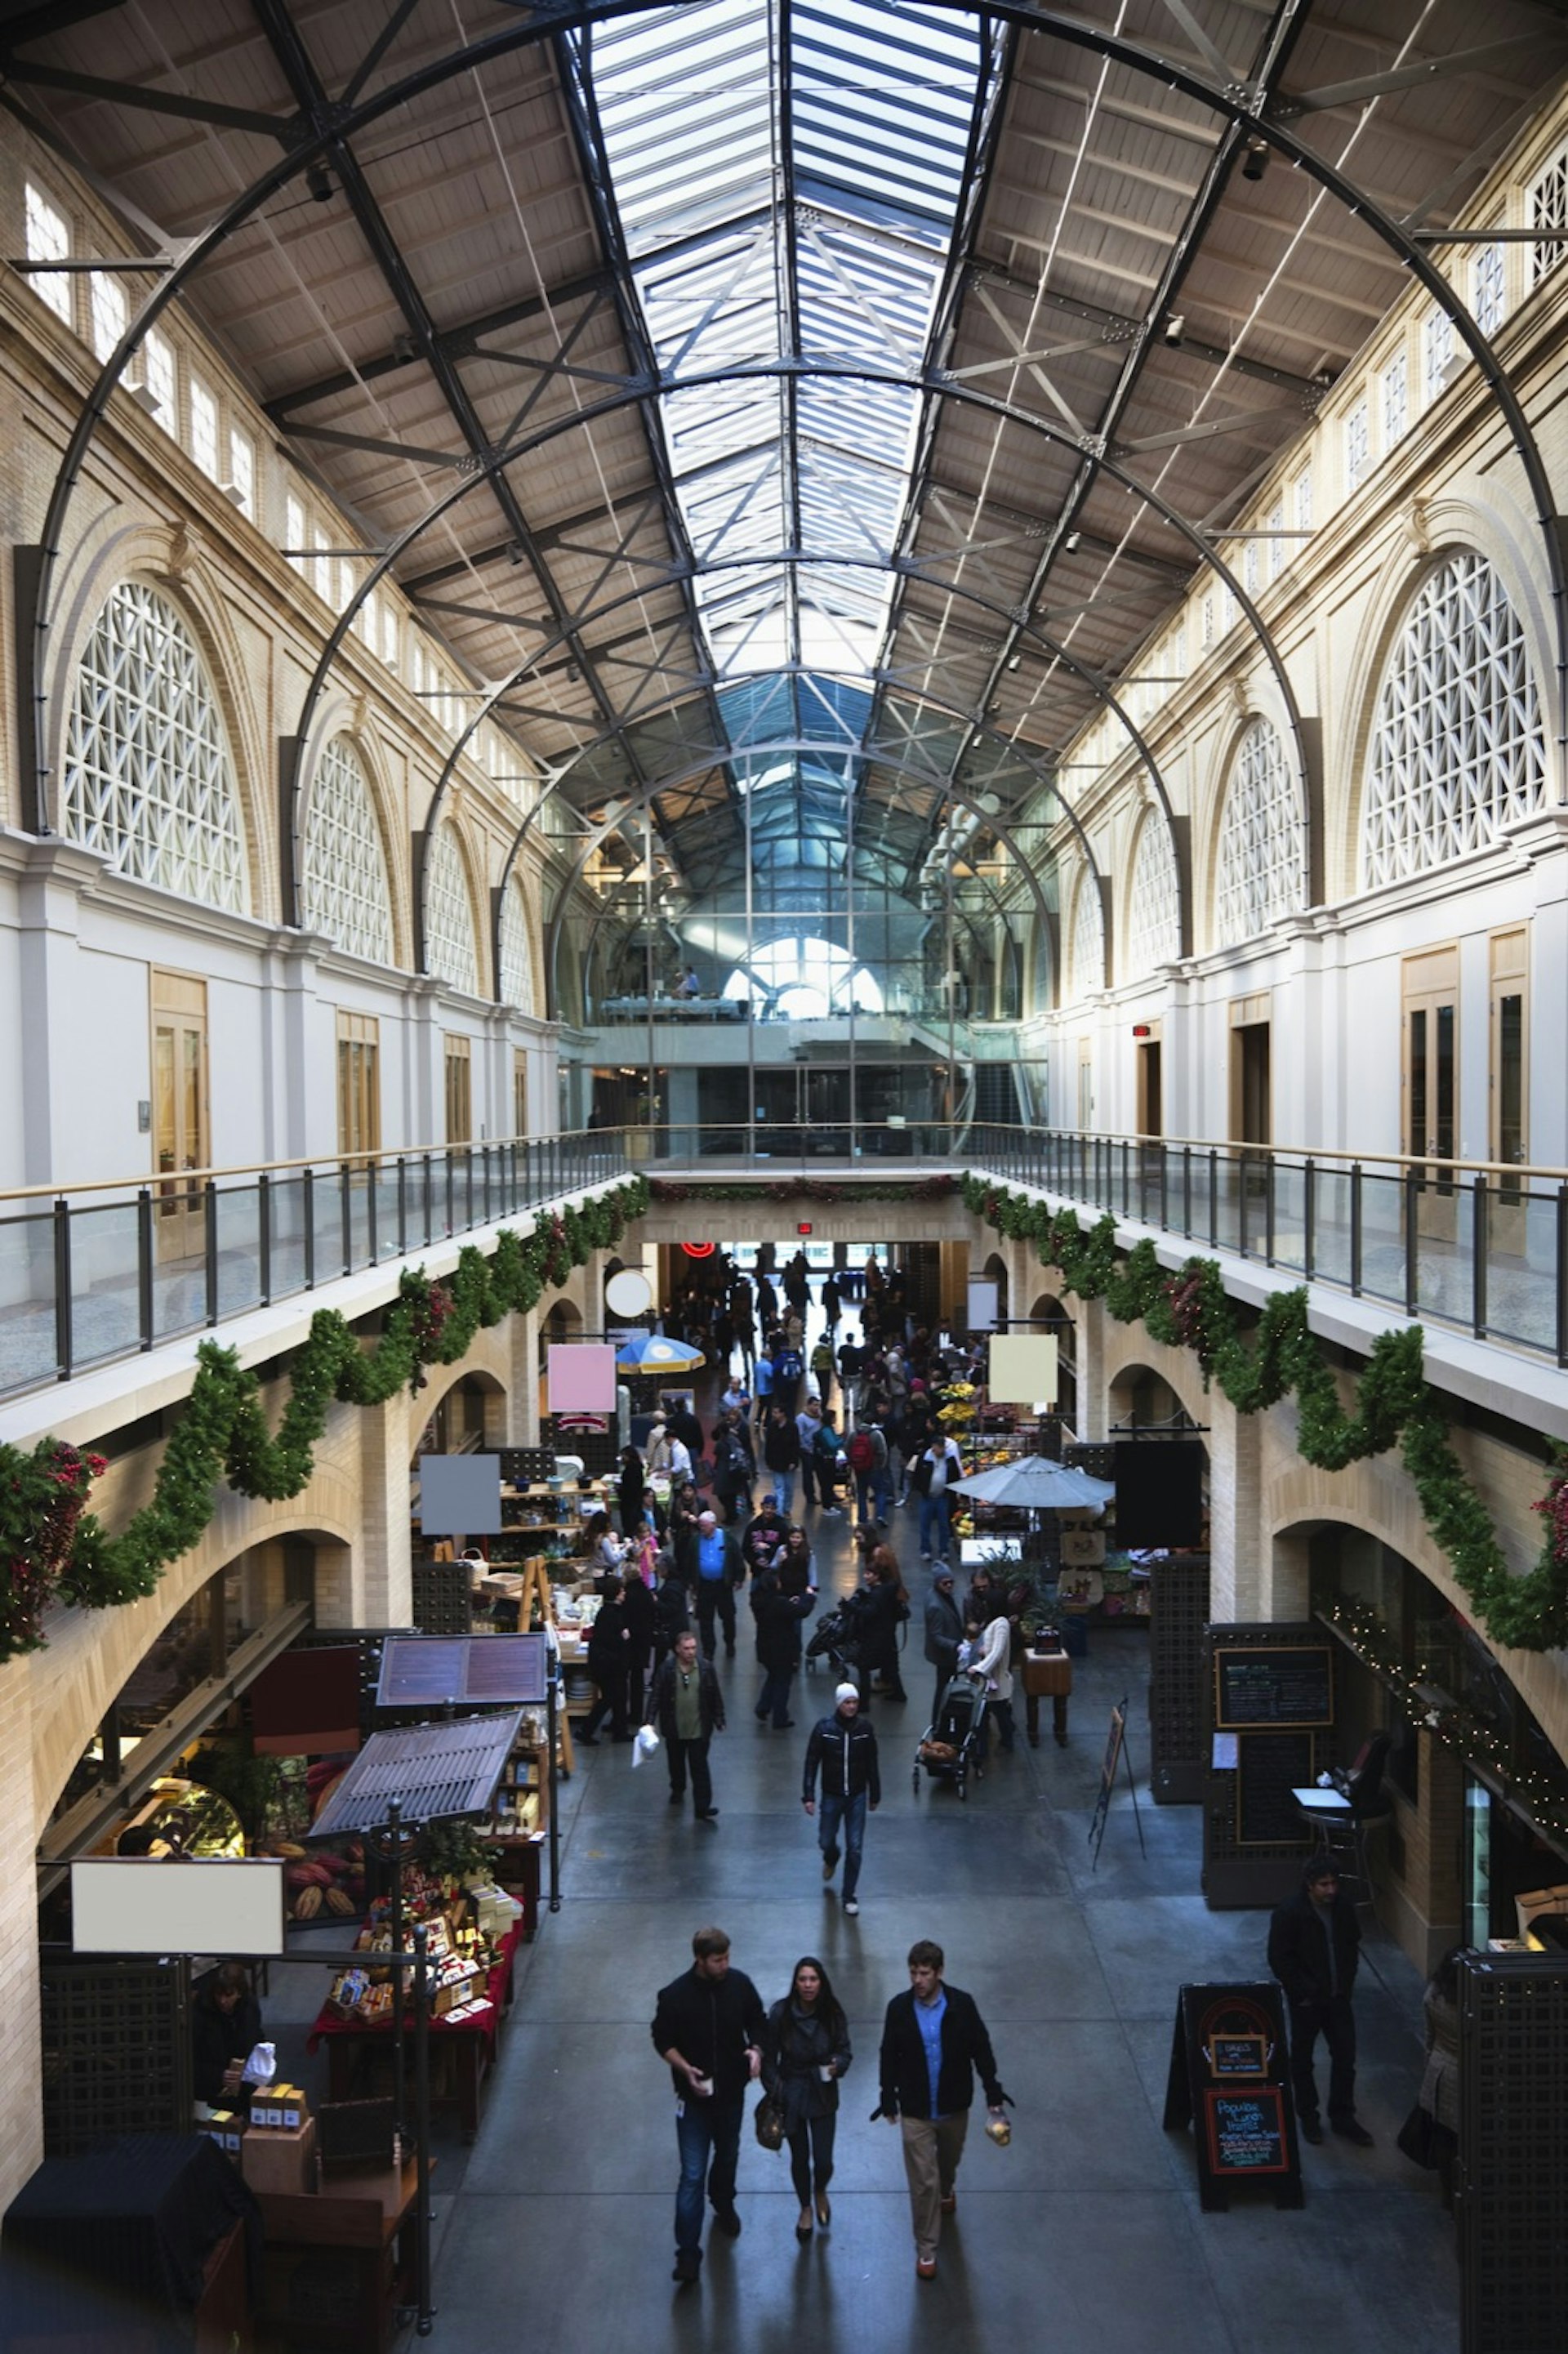 The Ferry building atrium from above. Weekend in San Francisco